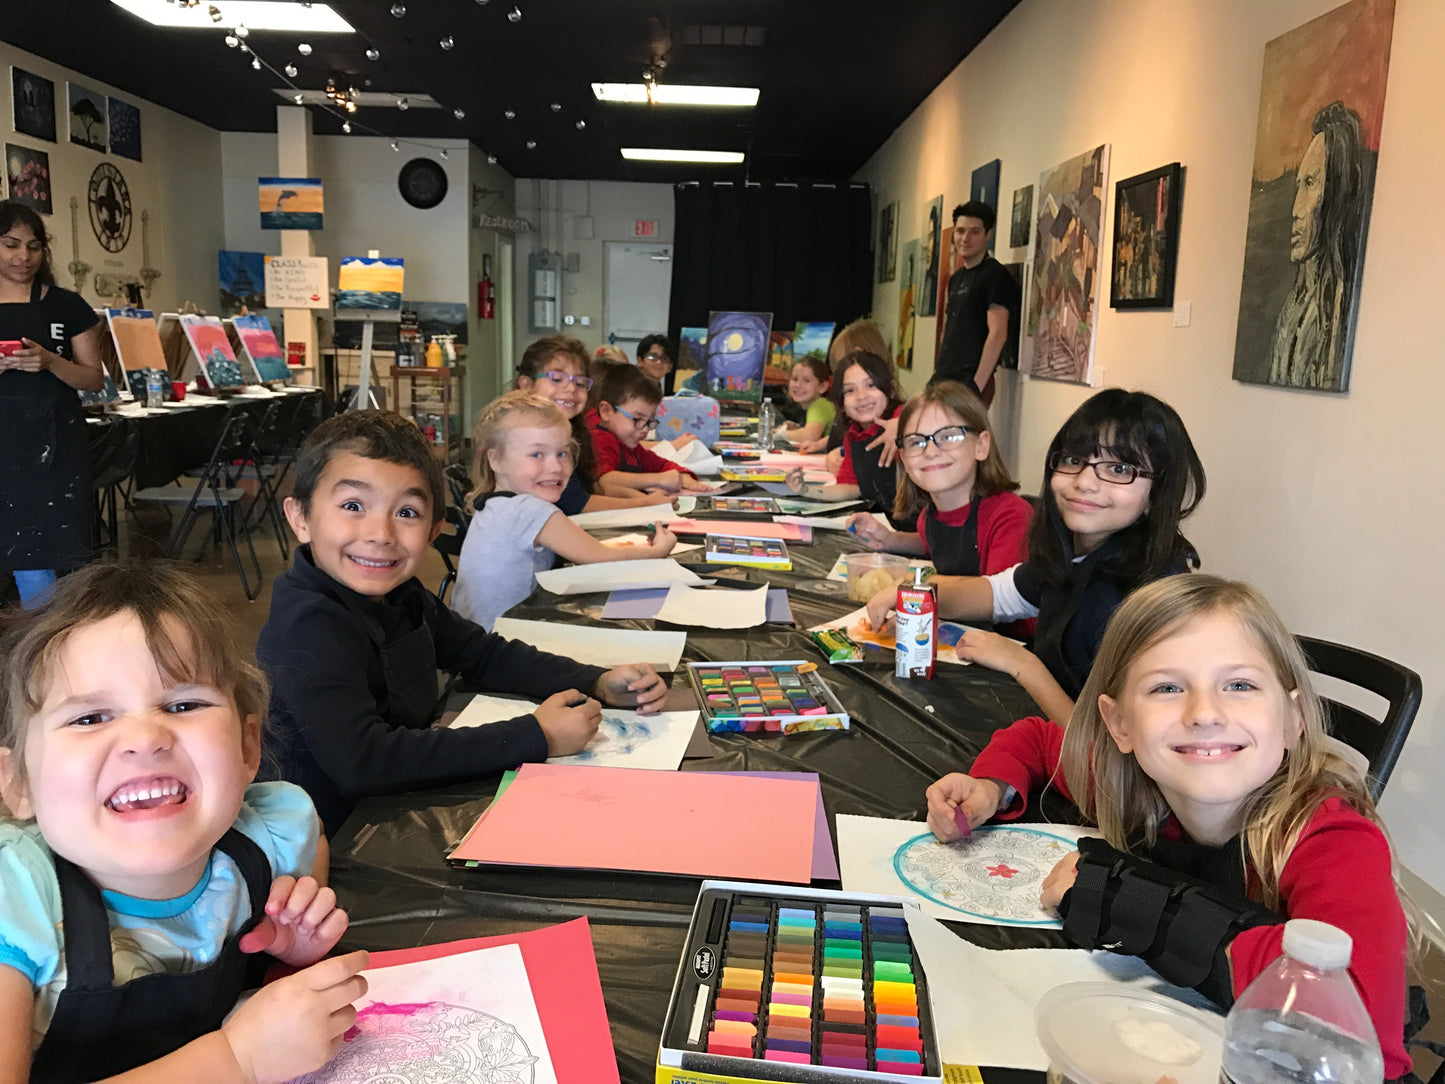 Sat, Sep 16th, 130-330P “Rainbow Koi” Private Houston Kids Painting Party